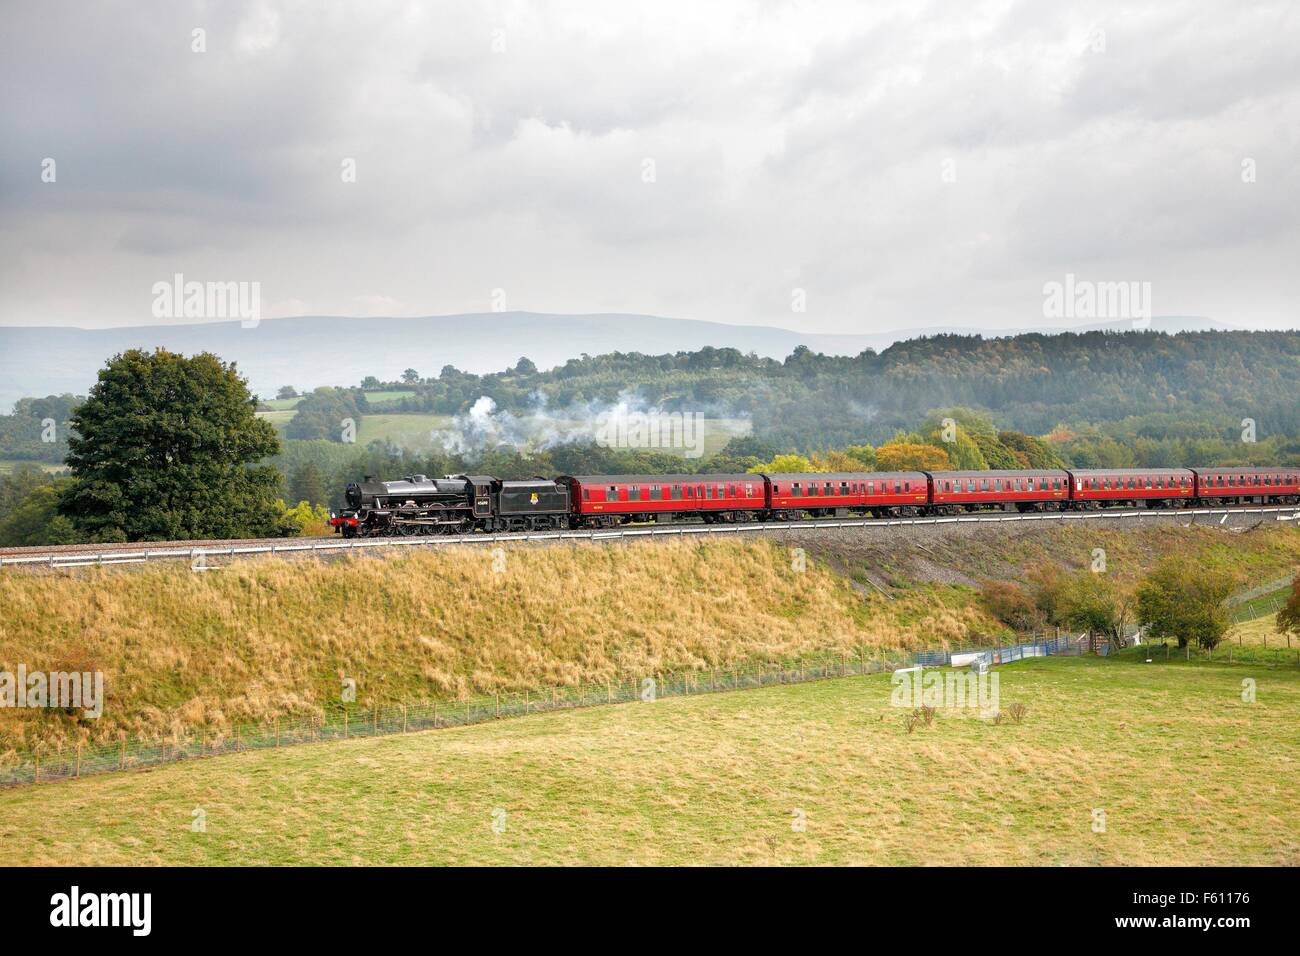 Steam locomotive LMS Jubilee Class Leander 45690 on the Settle to Carlisle Railway Line near Lazonby, Eden Valley, Cumbria, UK. Stock Photo